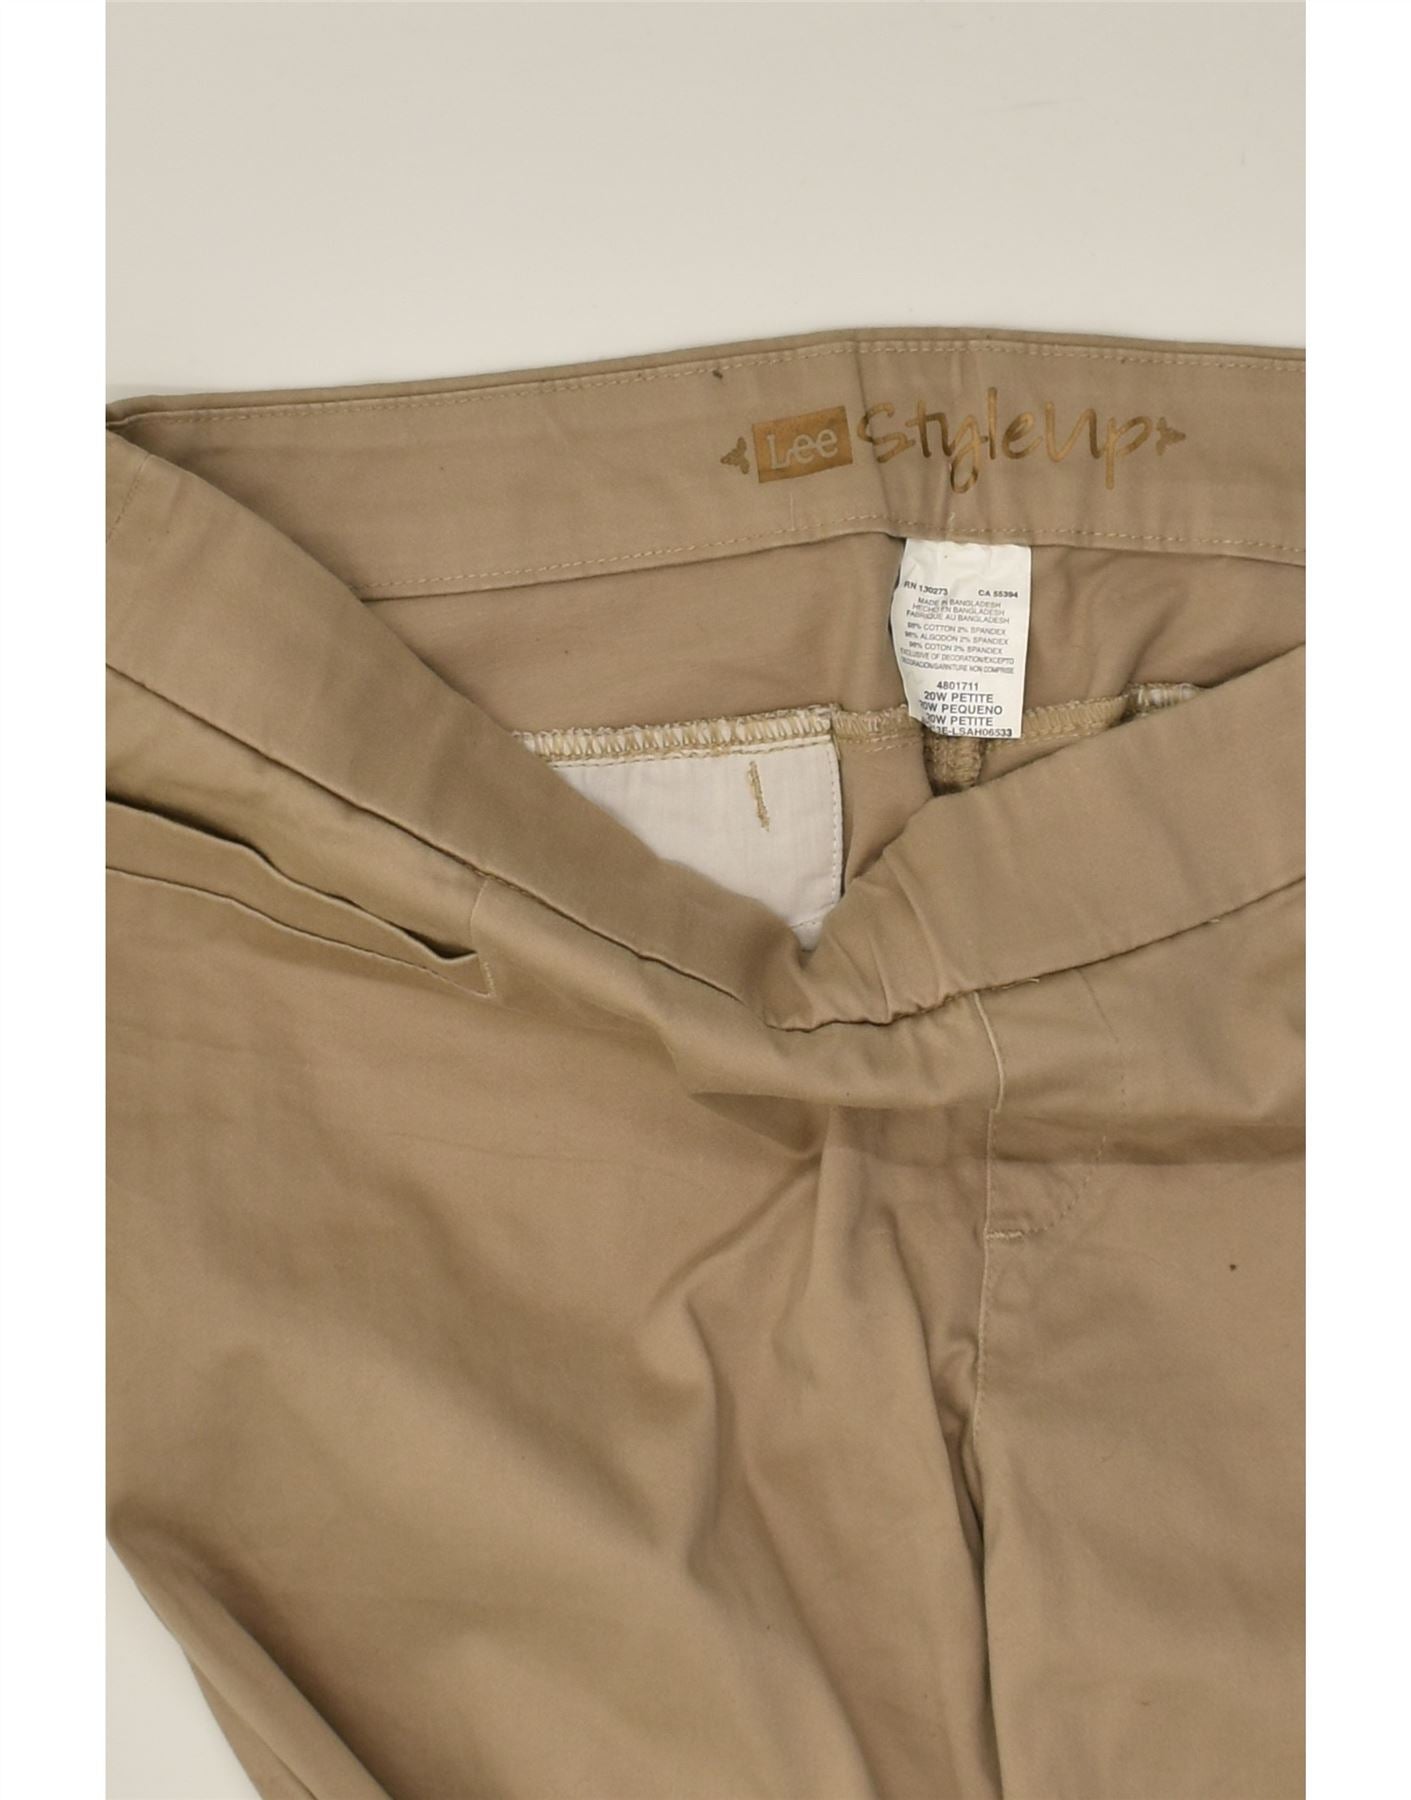 LEE Womens Petite Straight Casual Trousers US 20 3XL W42 L29 Beige Cotton |  Vintage & Second-Hand Clothing Online | Thrift Shop